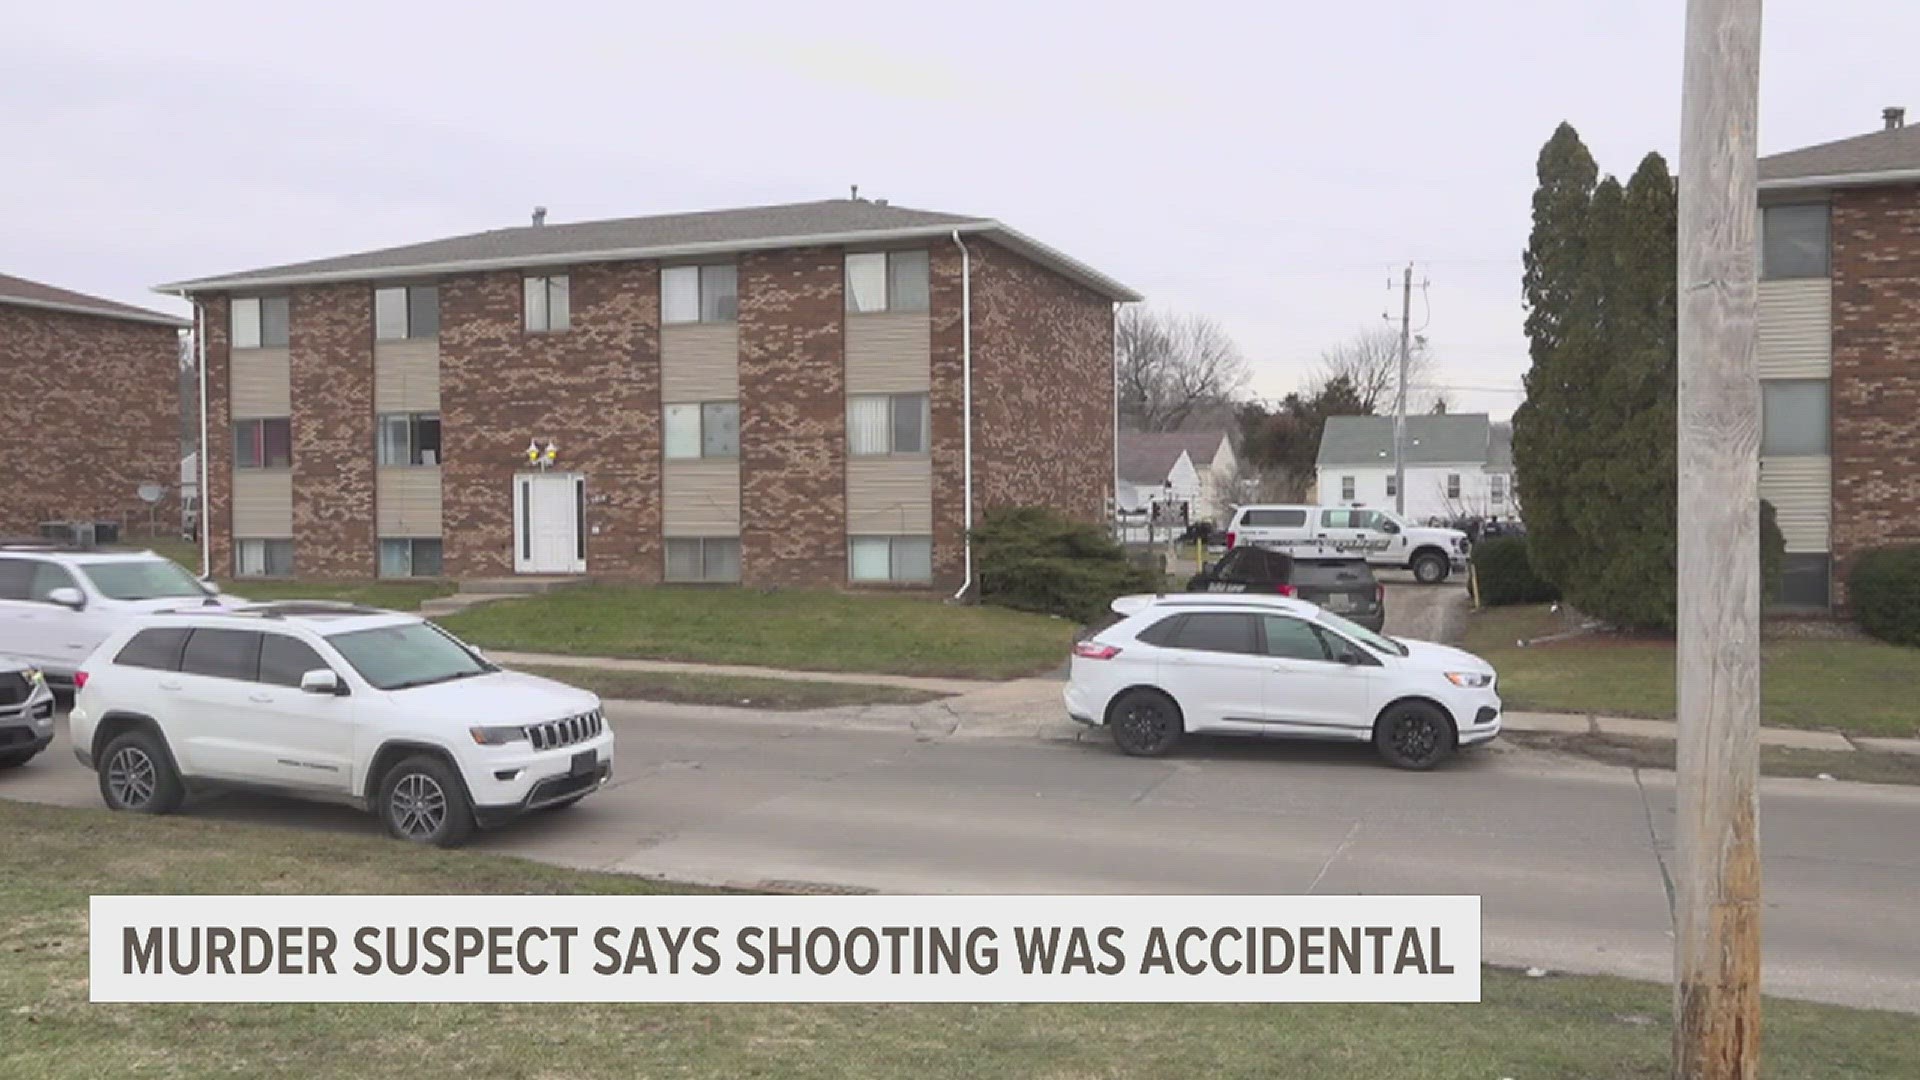 David McAdams claimed the body of 43-year-old Victoria Tillotson was in a car 5 days before he told Moline Police about the shooting, claiming it was accidental.